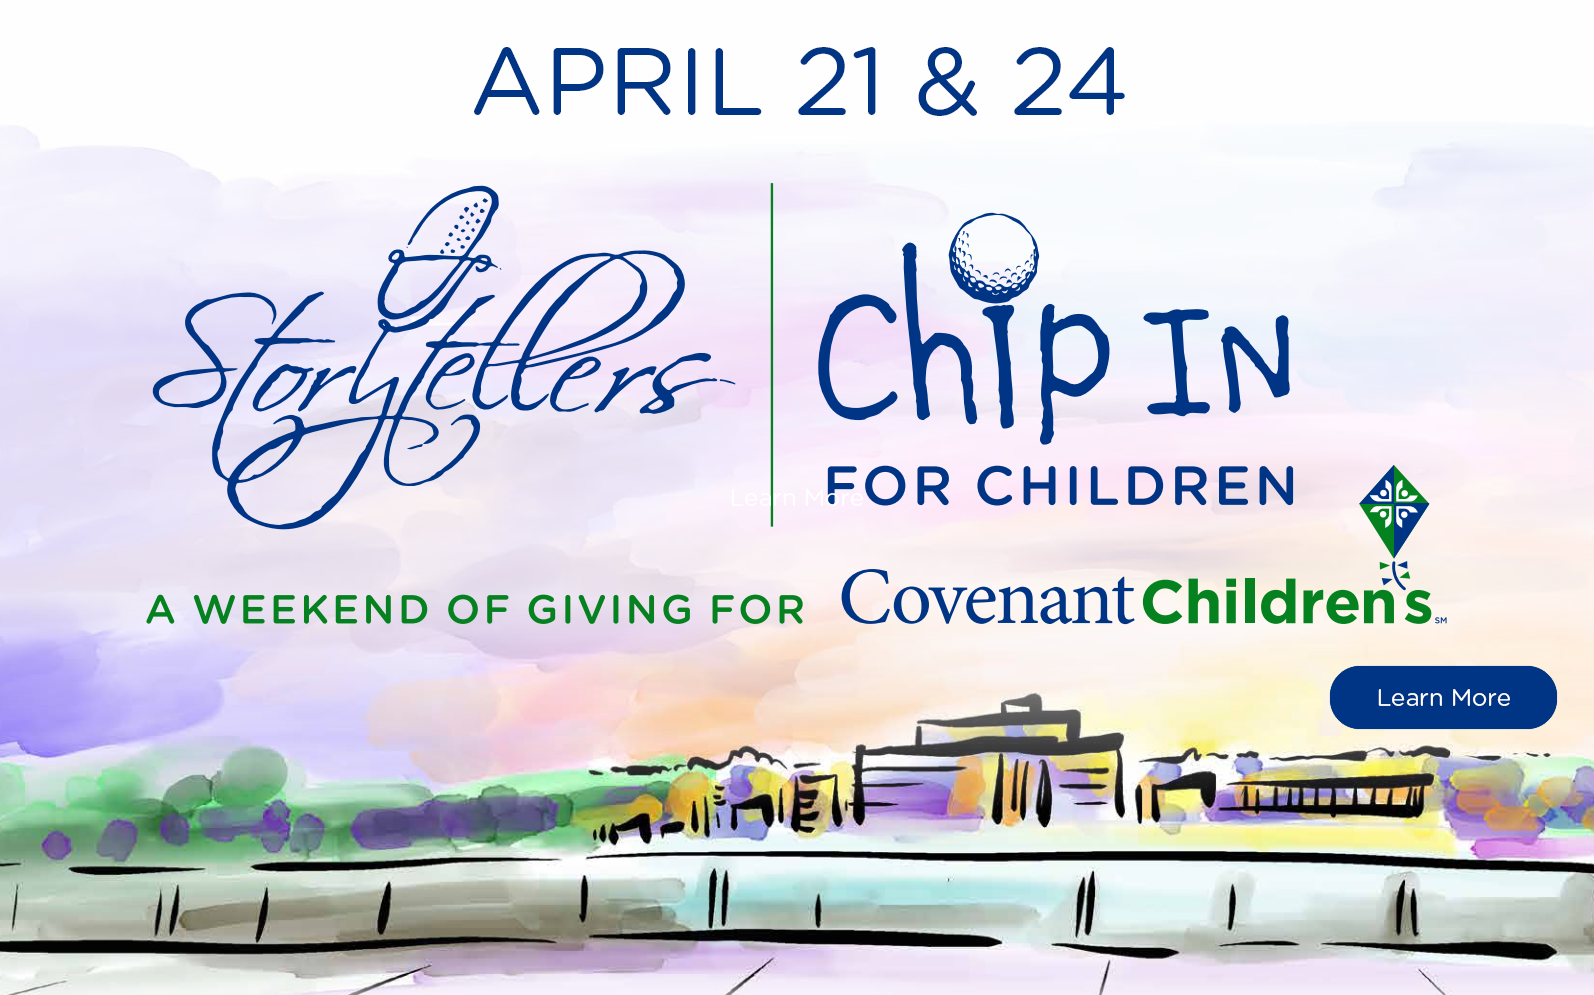 Storytellers and Chip In for Children April 21 & 24